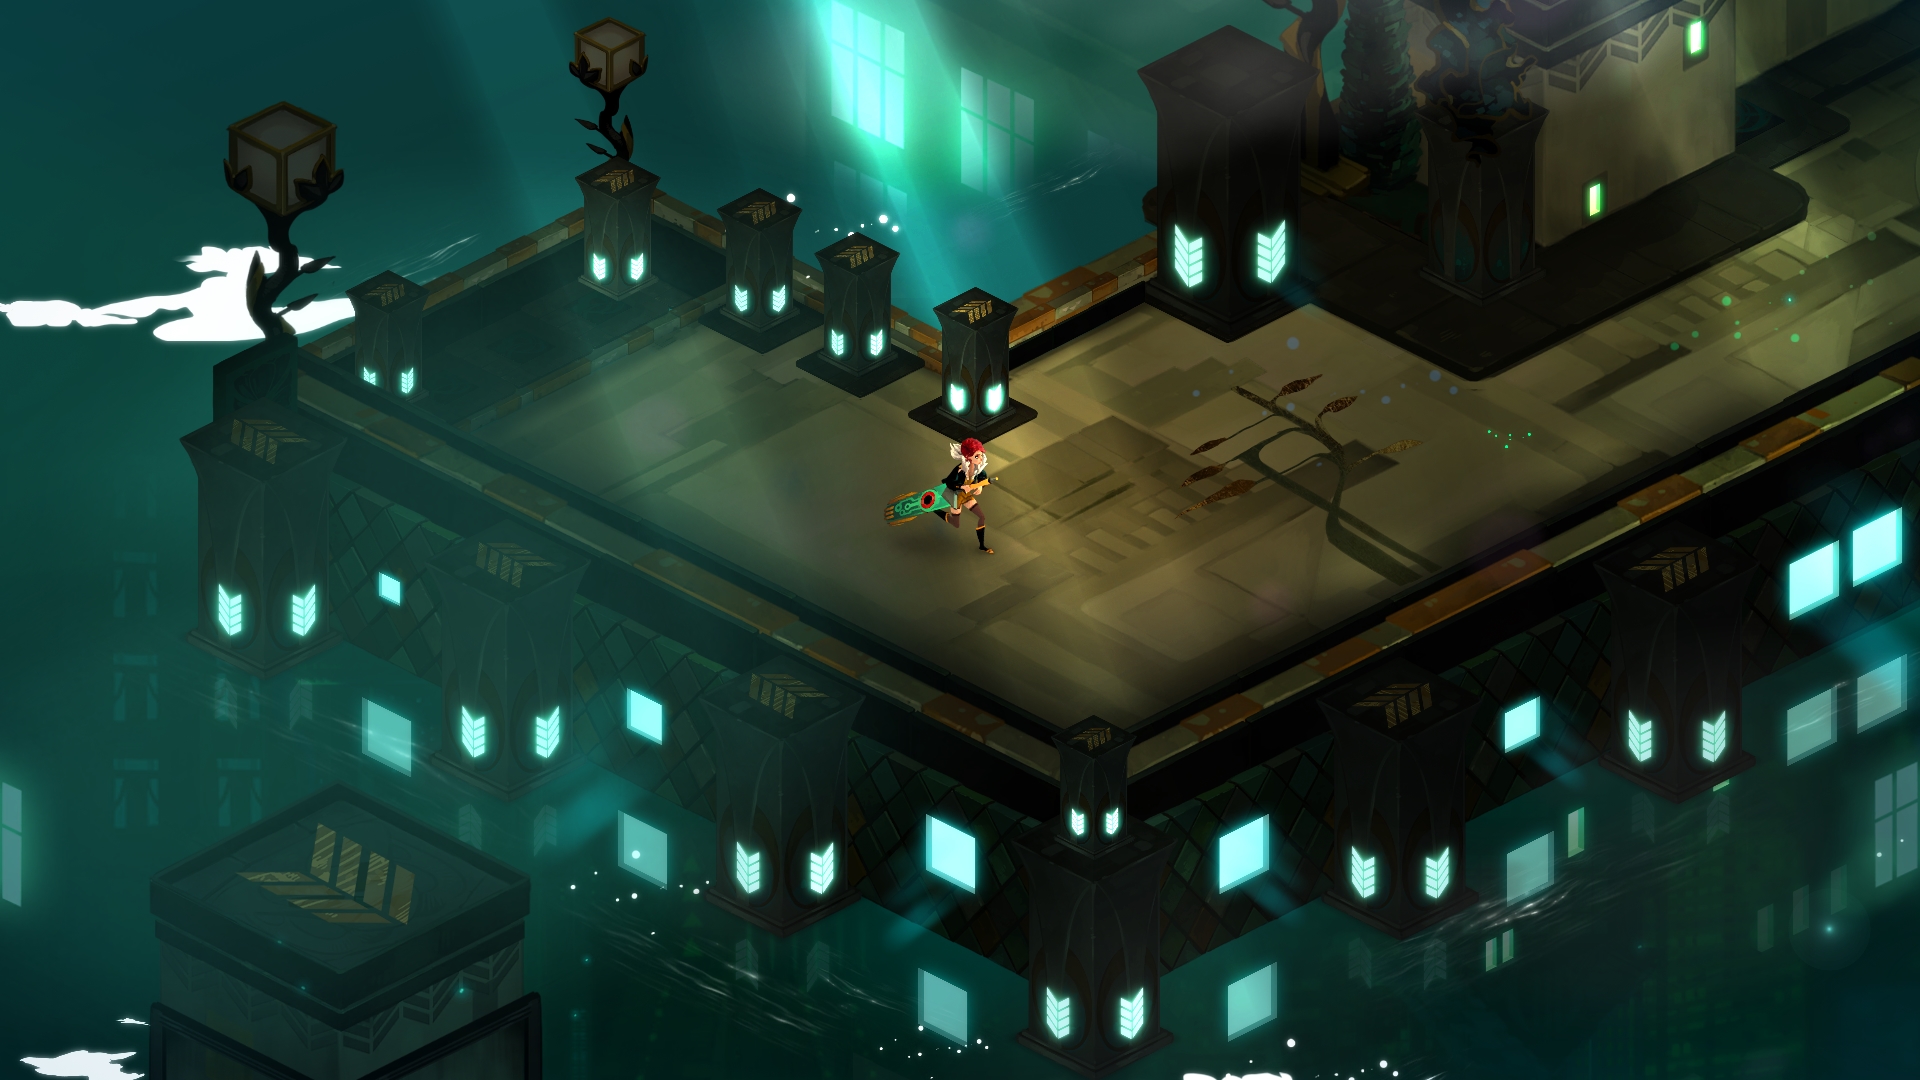 HD desktop wallpaper featuring a scene from the game Transistor with the main character holding a large sword, standing on a futuristic platform.